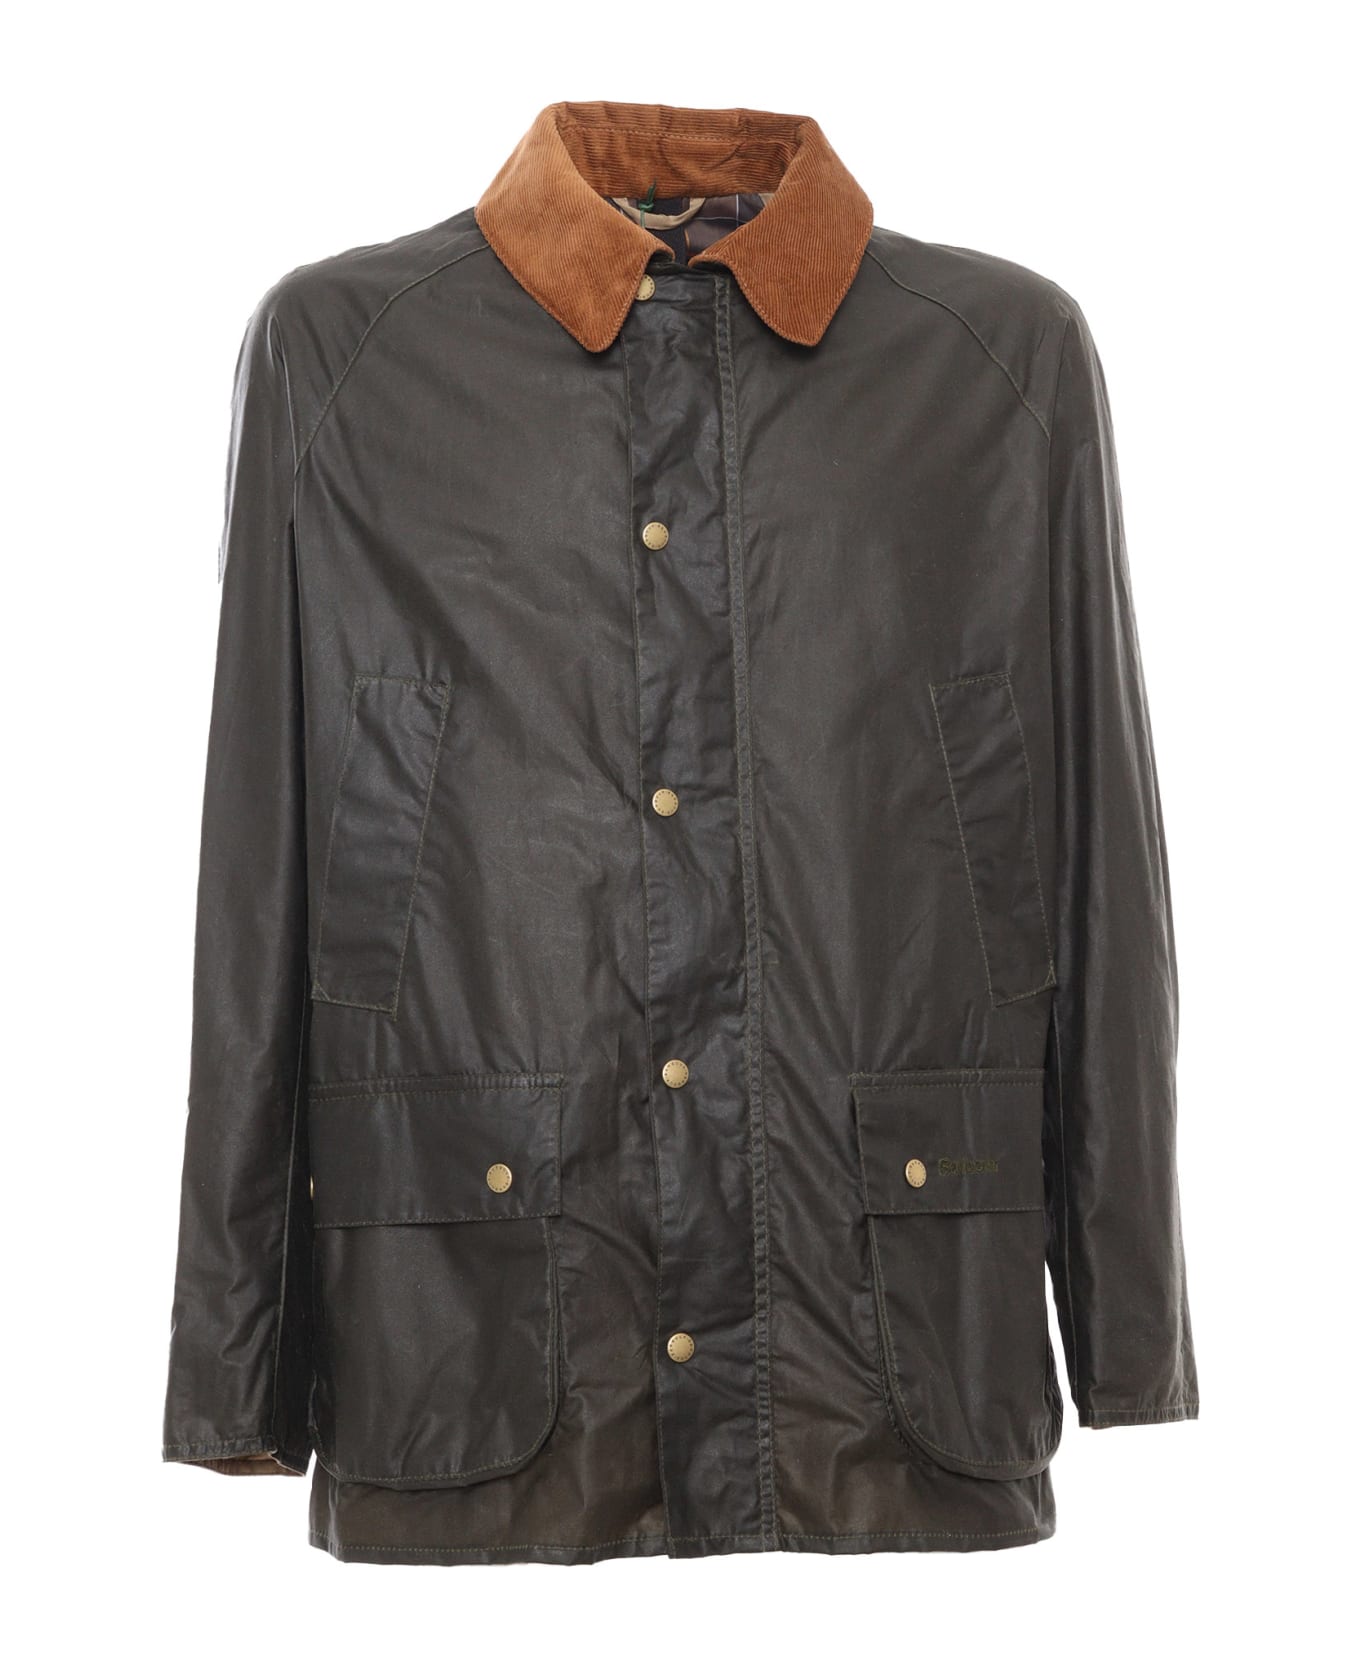 Barbour Ashby Wax Jacket - GREEN ジャケット